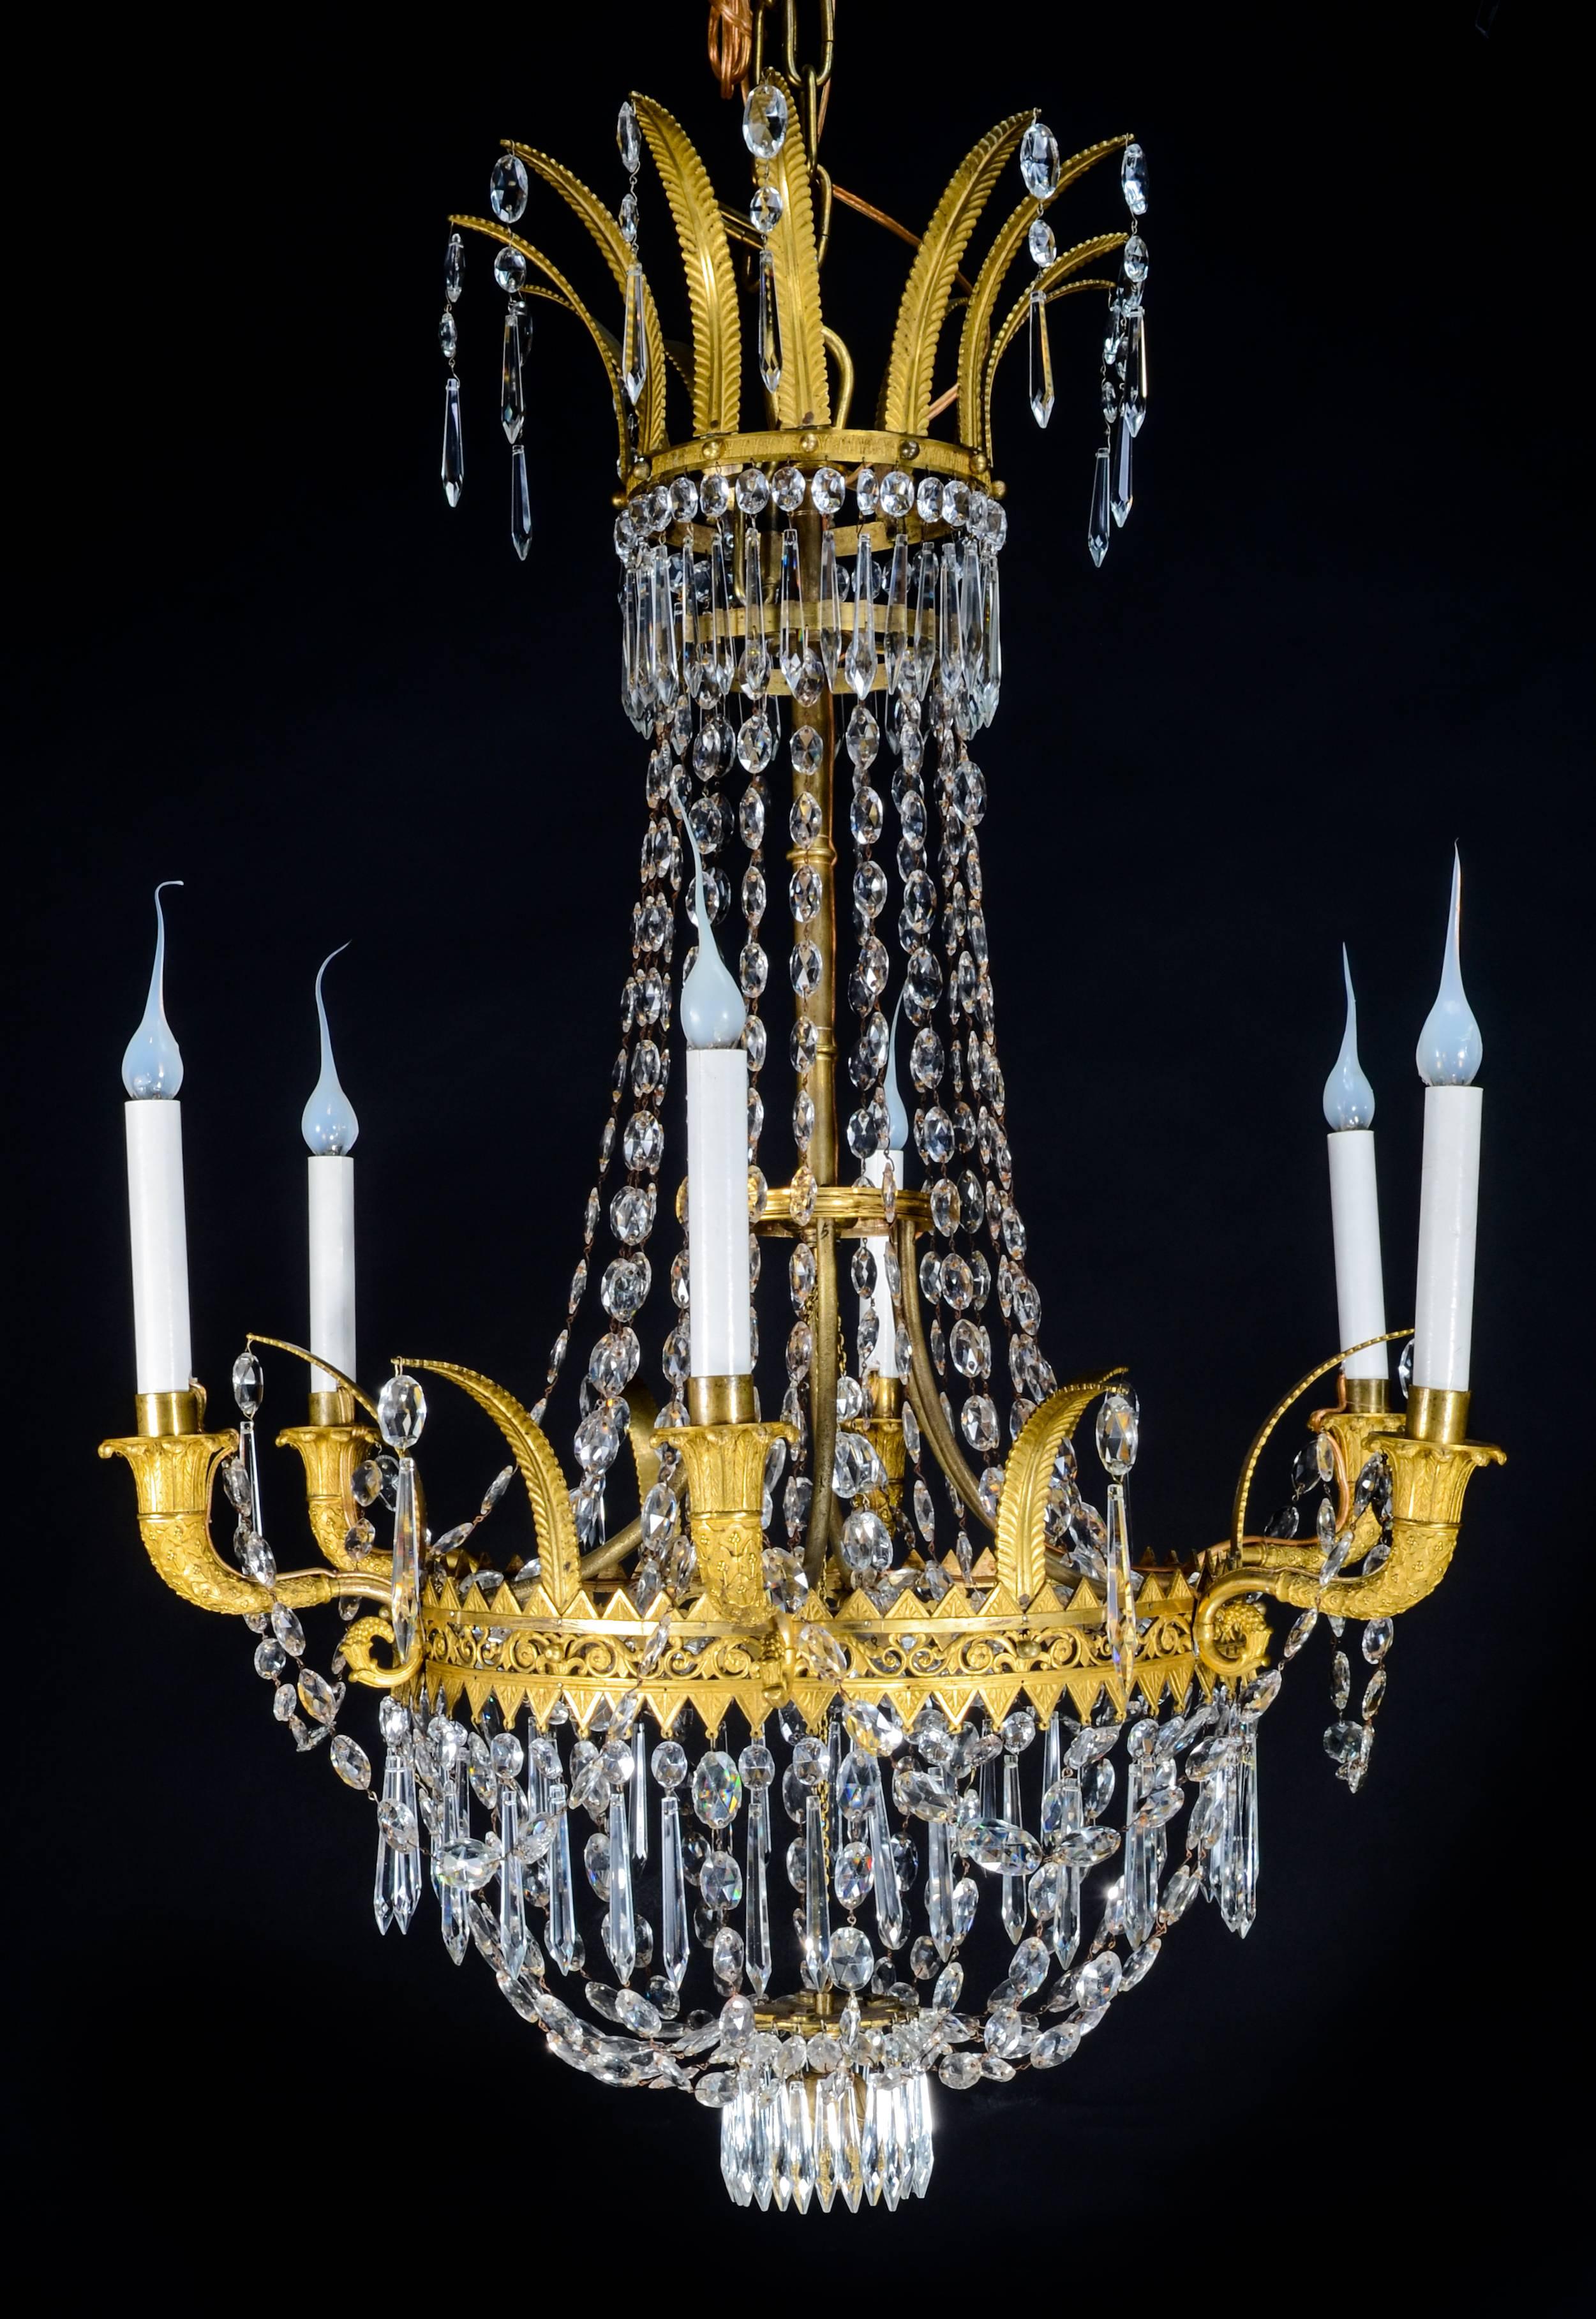 A superb antique Empire gilt bronze and cut crystal multi light chandelier of exquisite detail embellished with cut crystal prisms and chains, circa 1810.